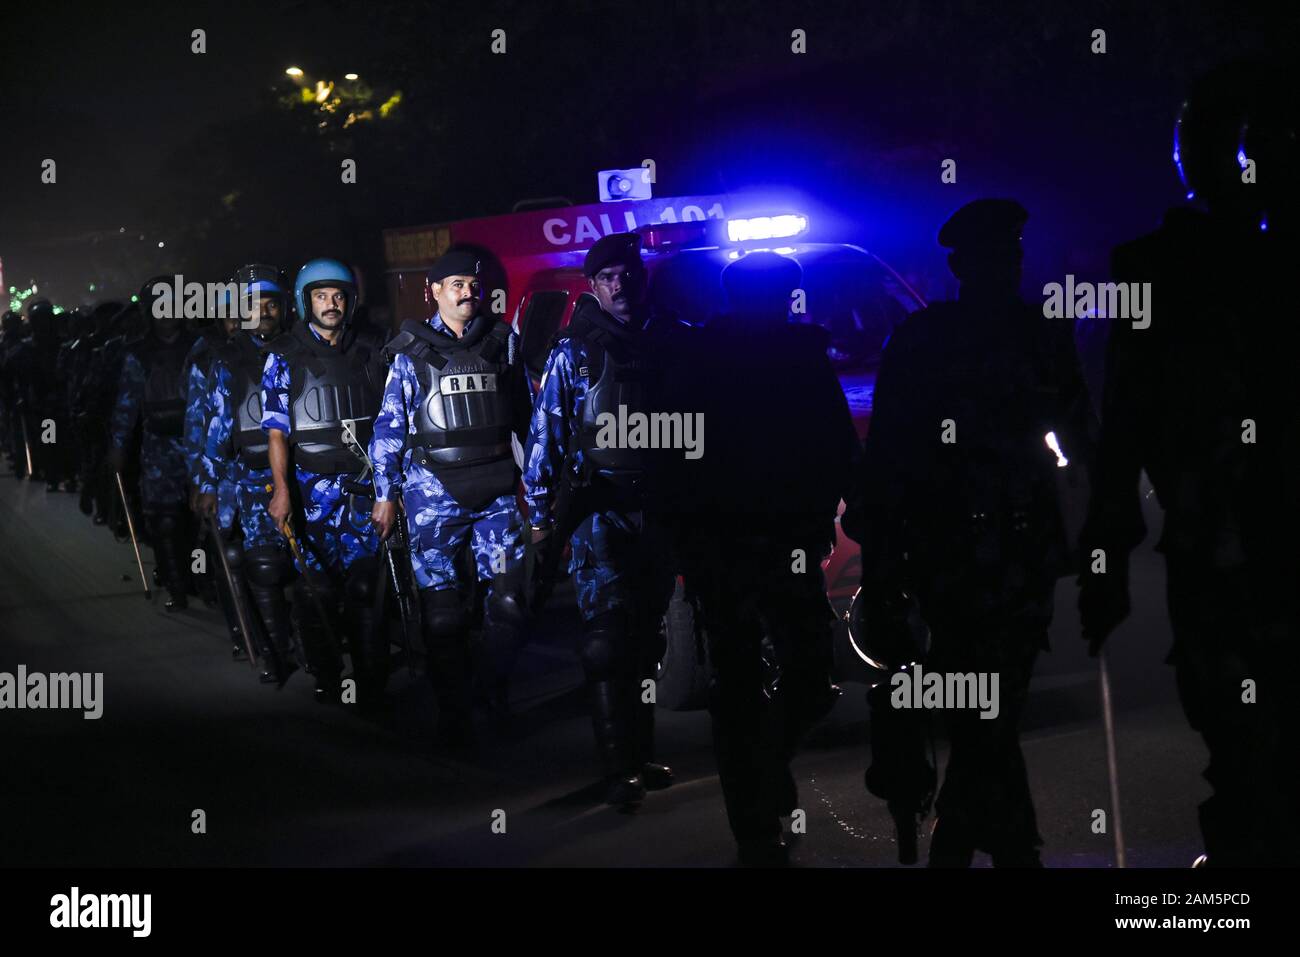 Guwahati, Assam, India. 11th Jan, 2020. Rapid Action Force (RAF) personnel during protest against the Citizenship (Amendment) Act (CAA), in Guwahati. Credit: David Talukdar/ZUMA Wire/Alamy Live News Stock Photo